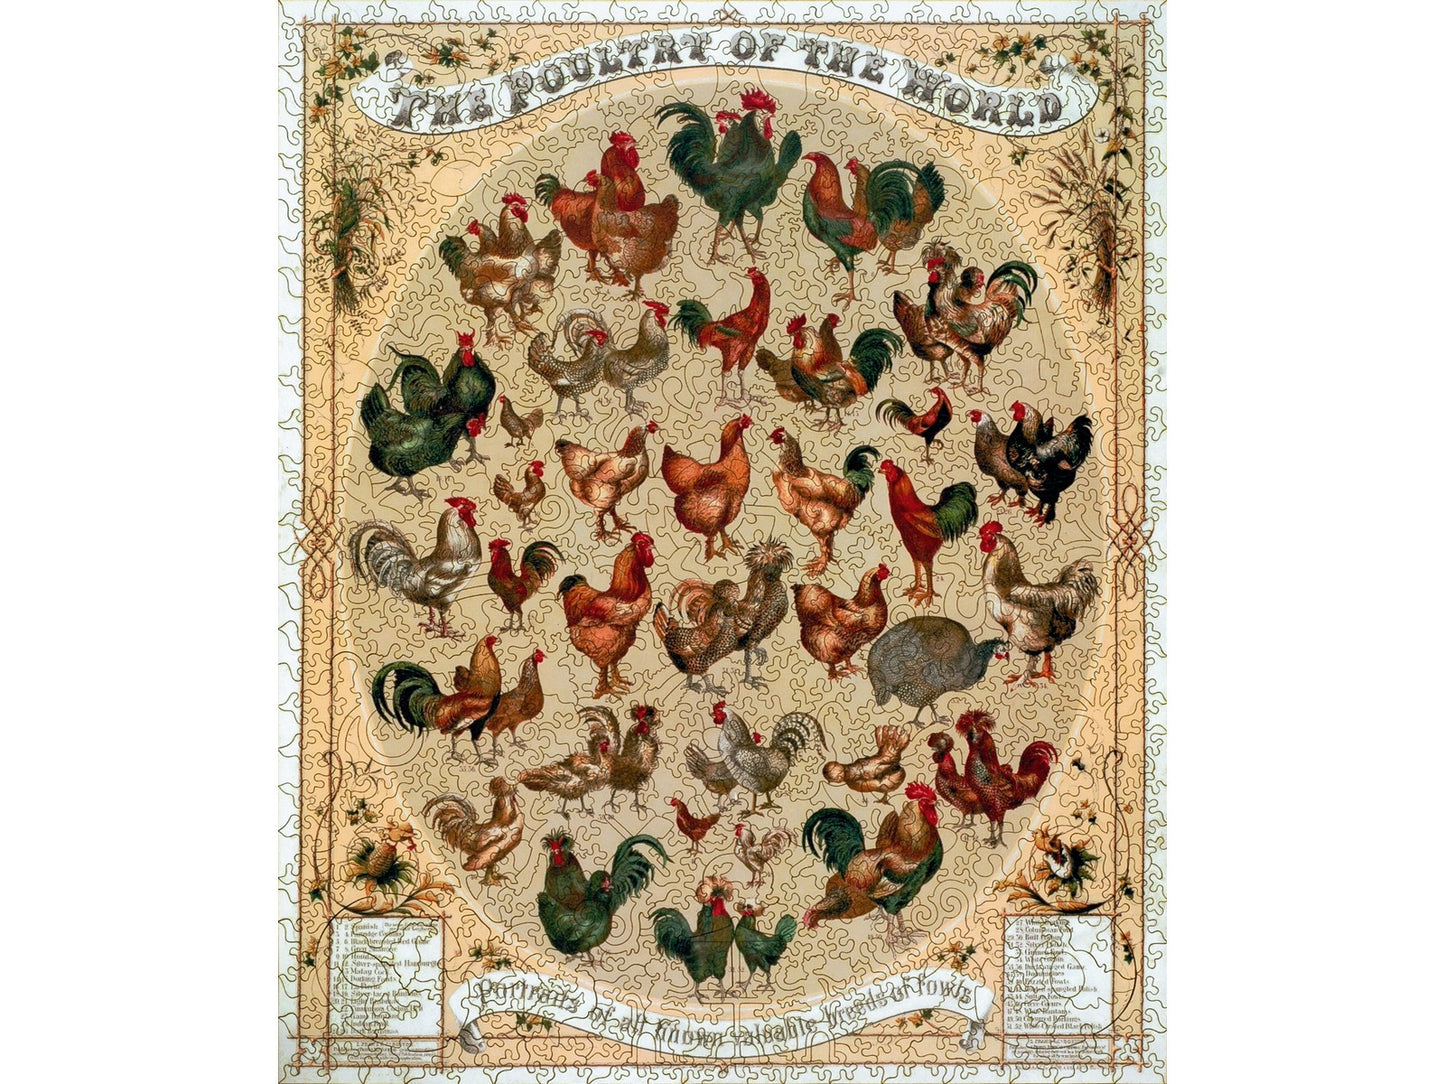 The front of the puzzle, Poultry of the World, which shows a vintage print of many different kinds of poultry fowl.